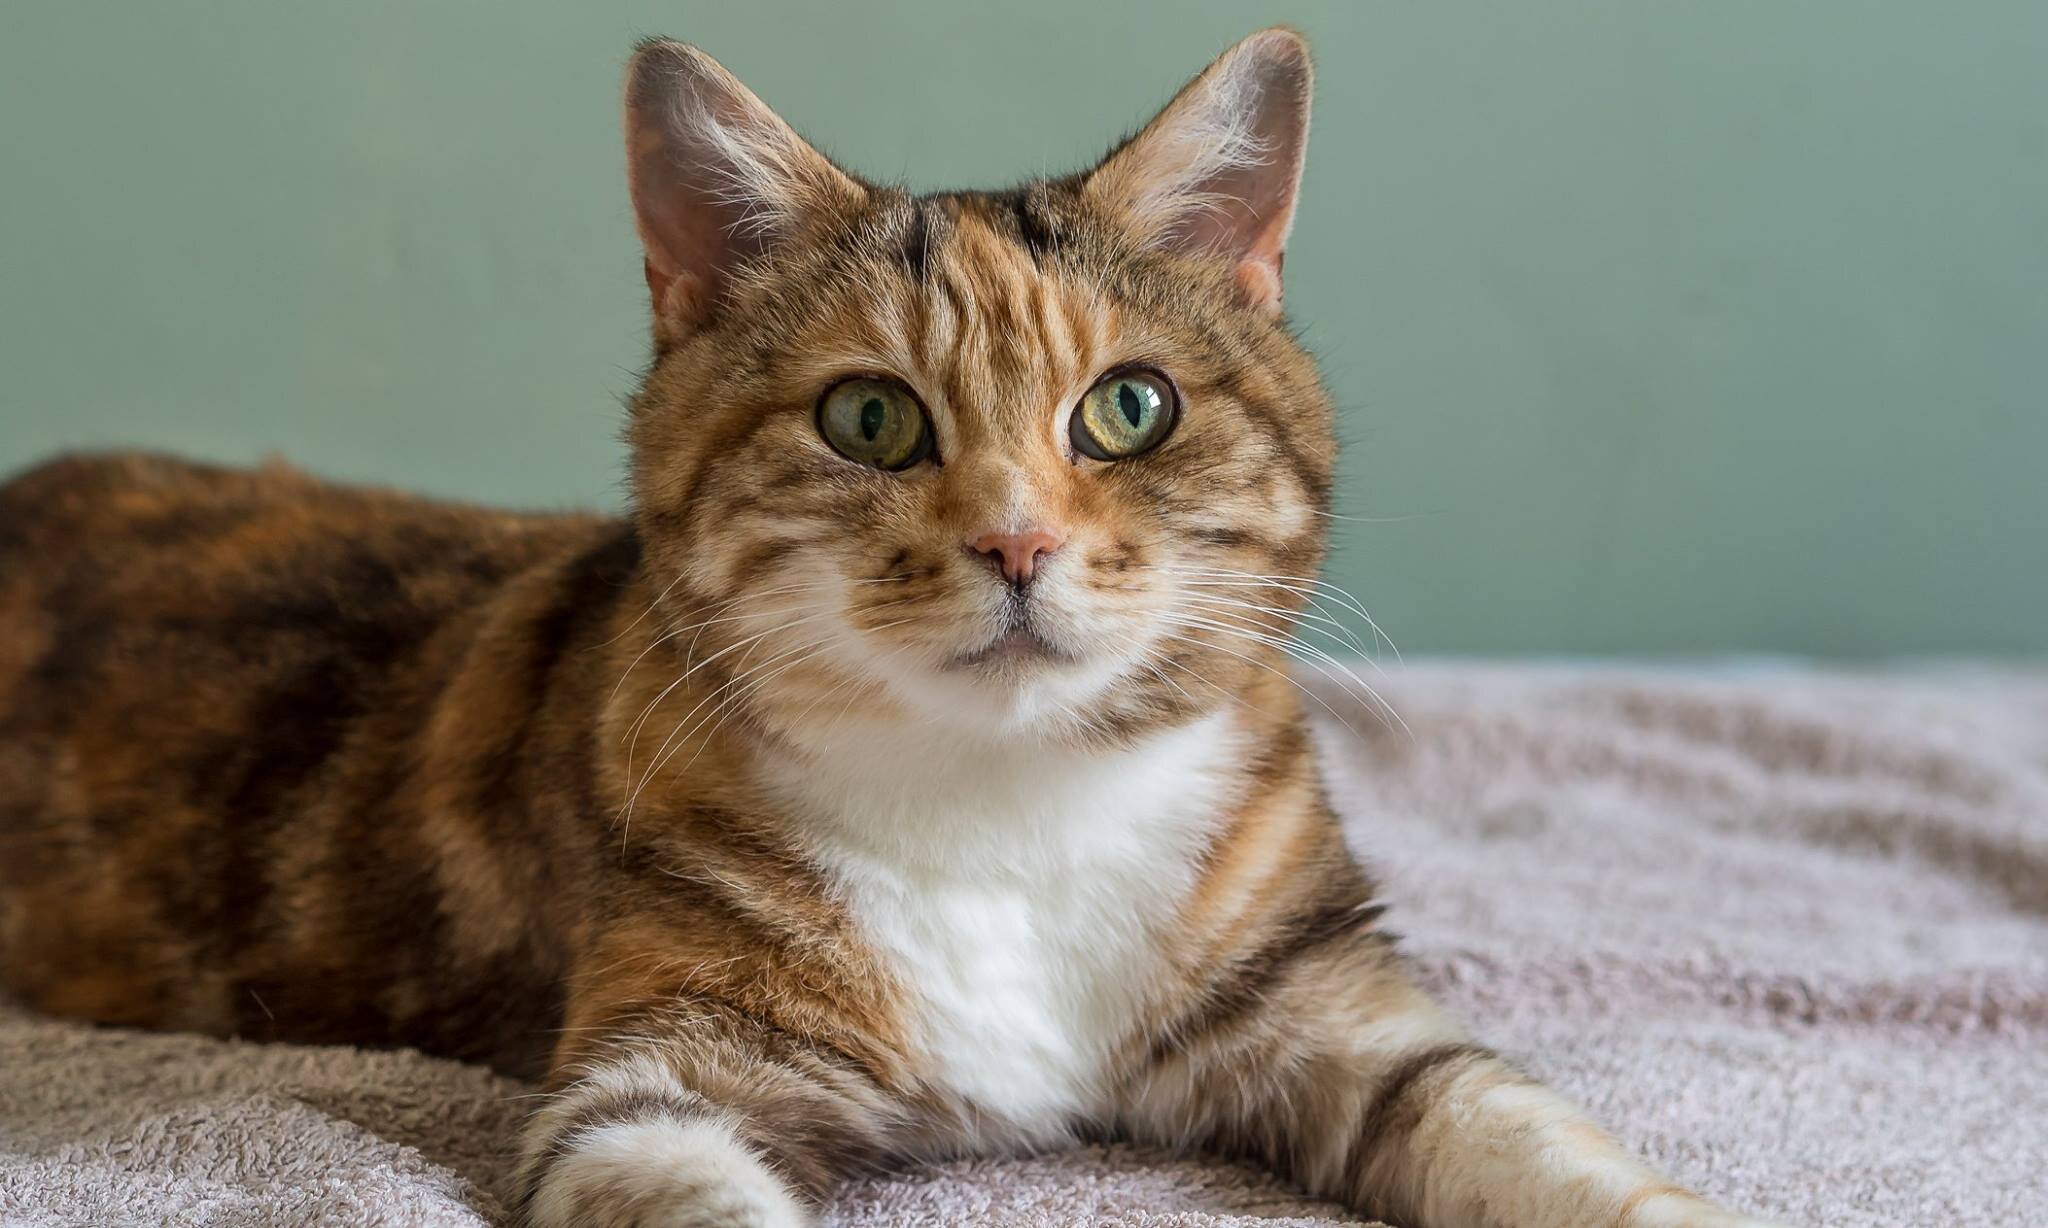 Adopting Senior Cats is a rewarding and challenging experience
